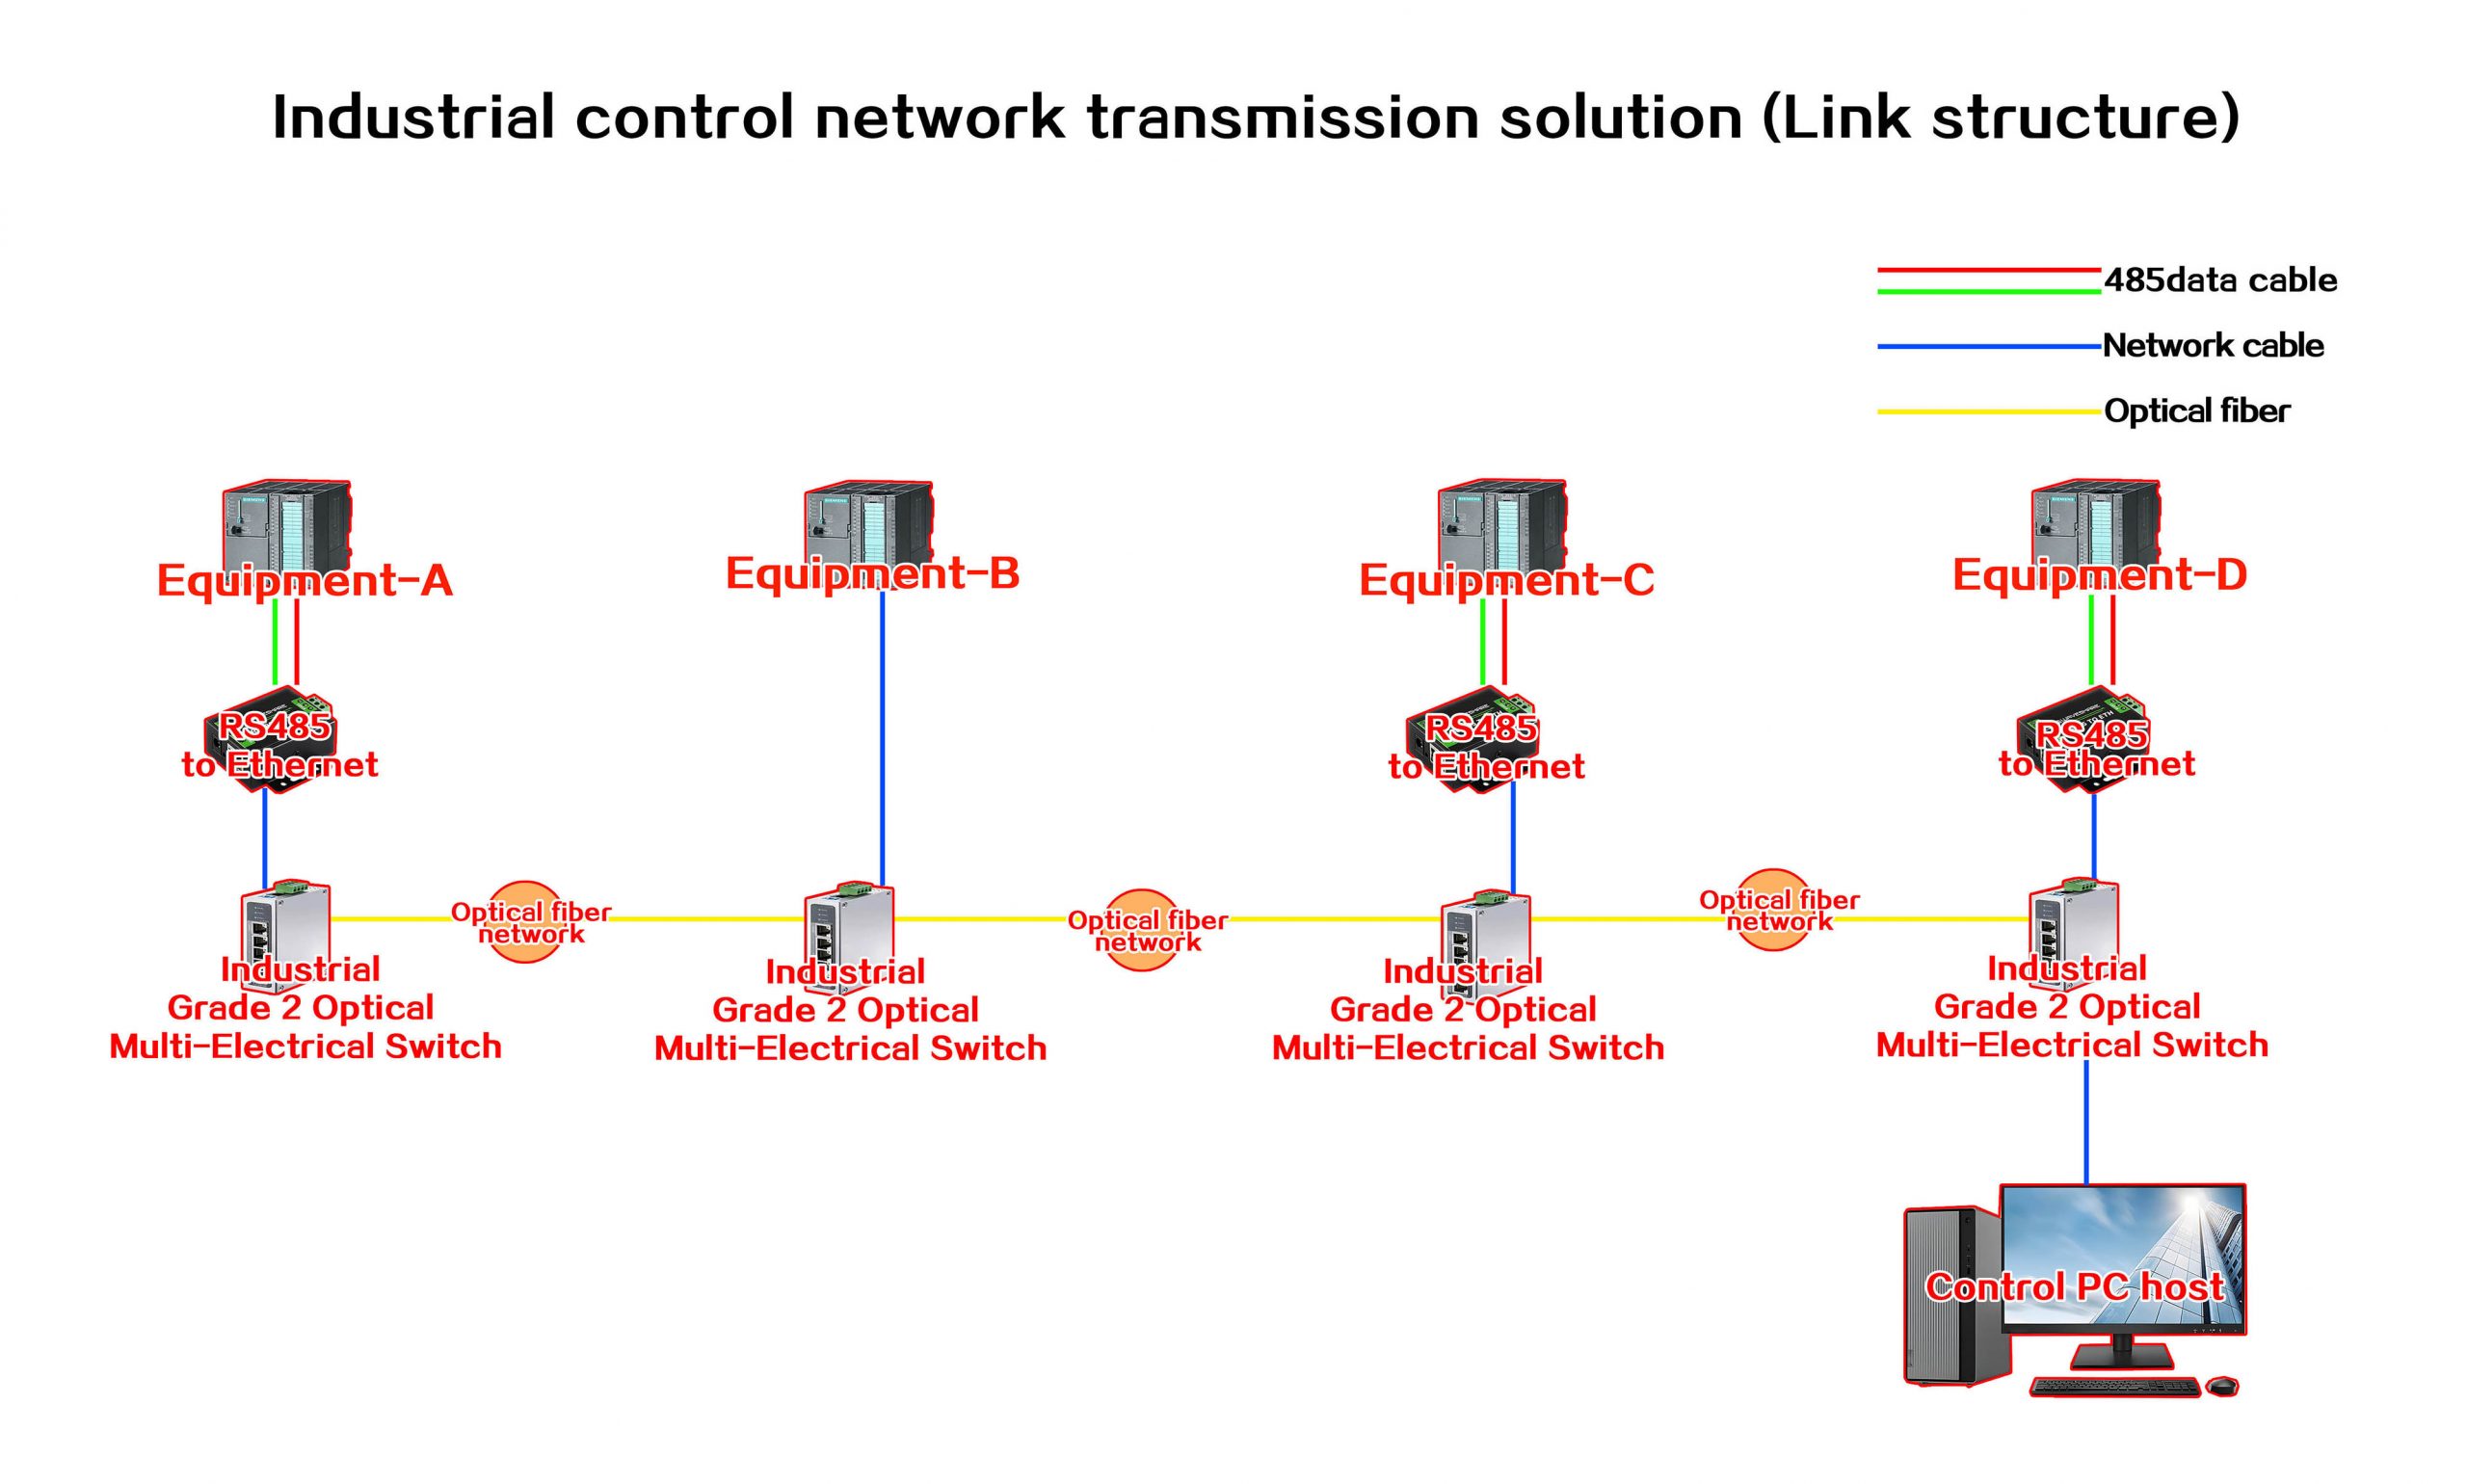 Industrial control network transmission solutions